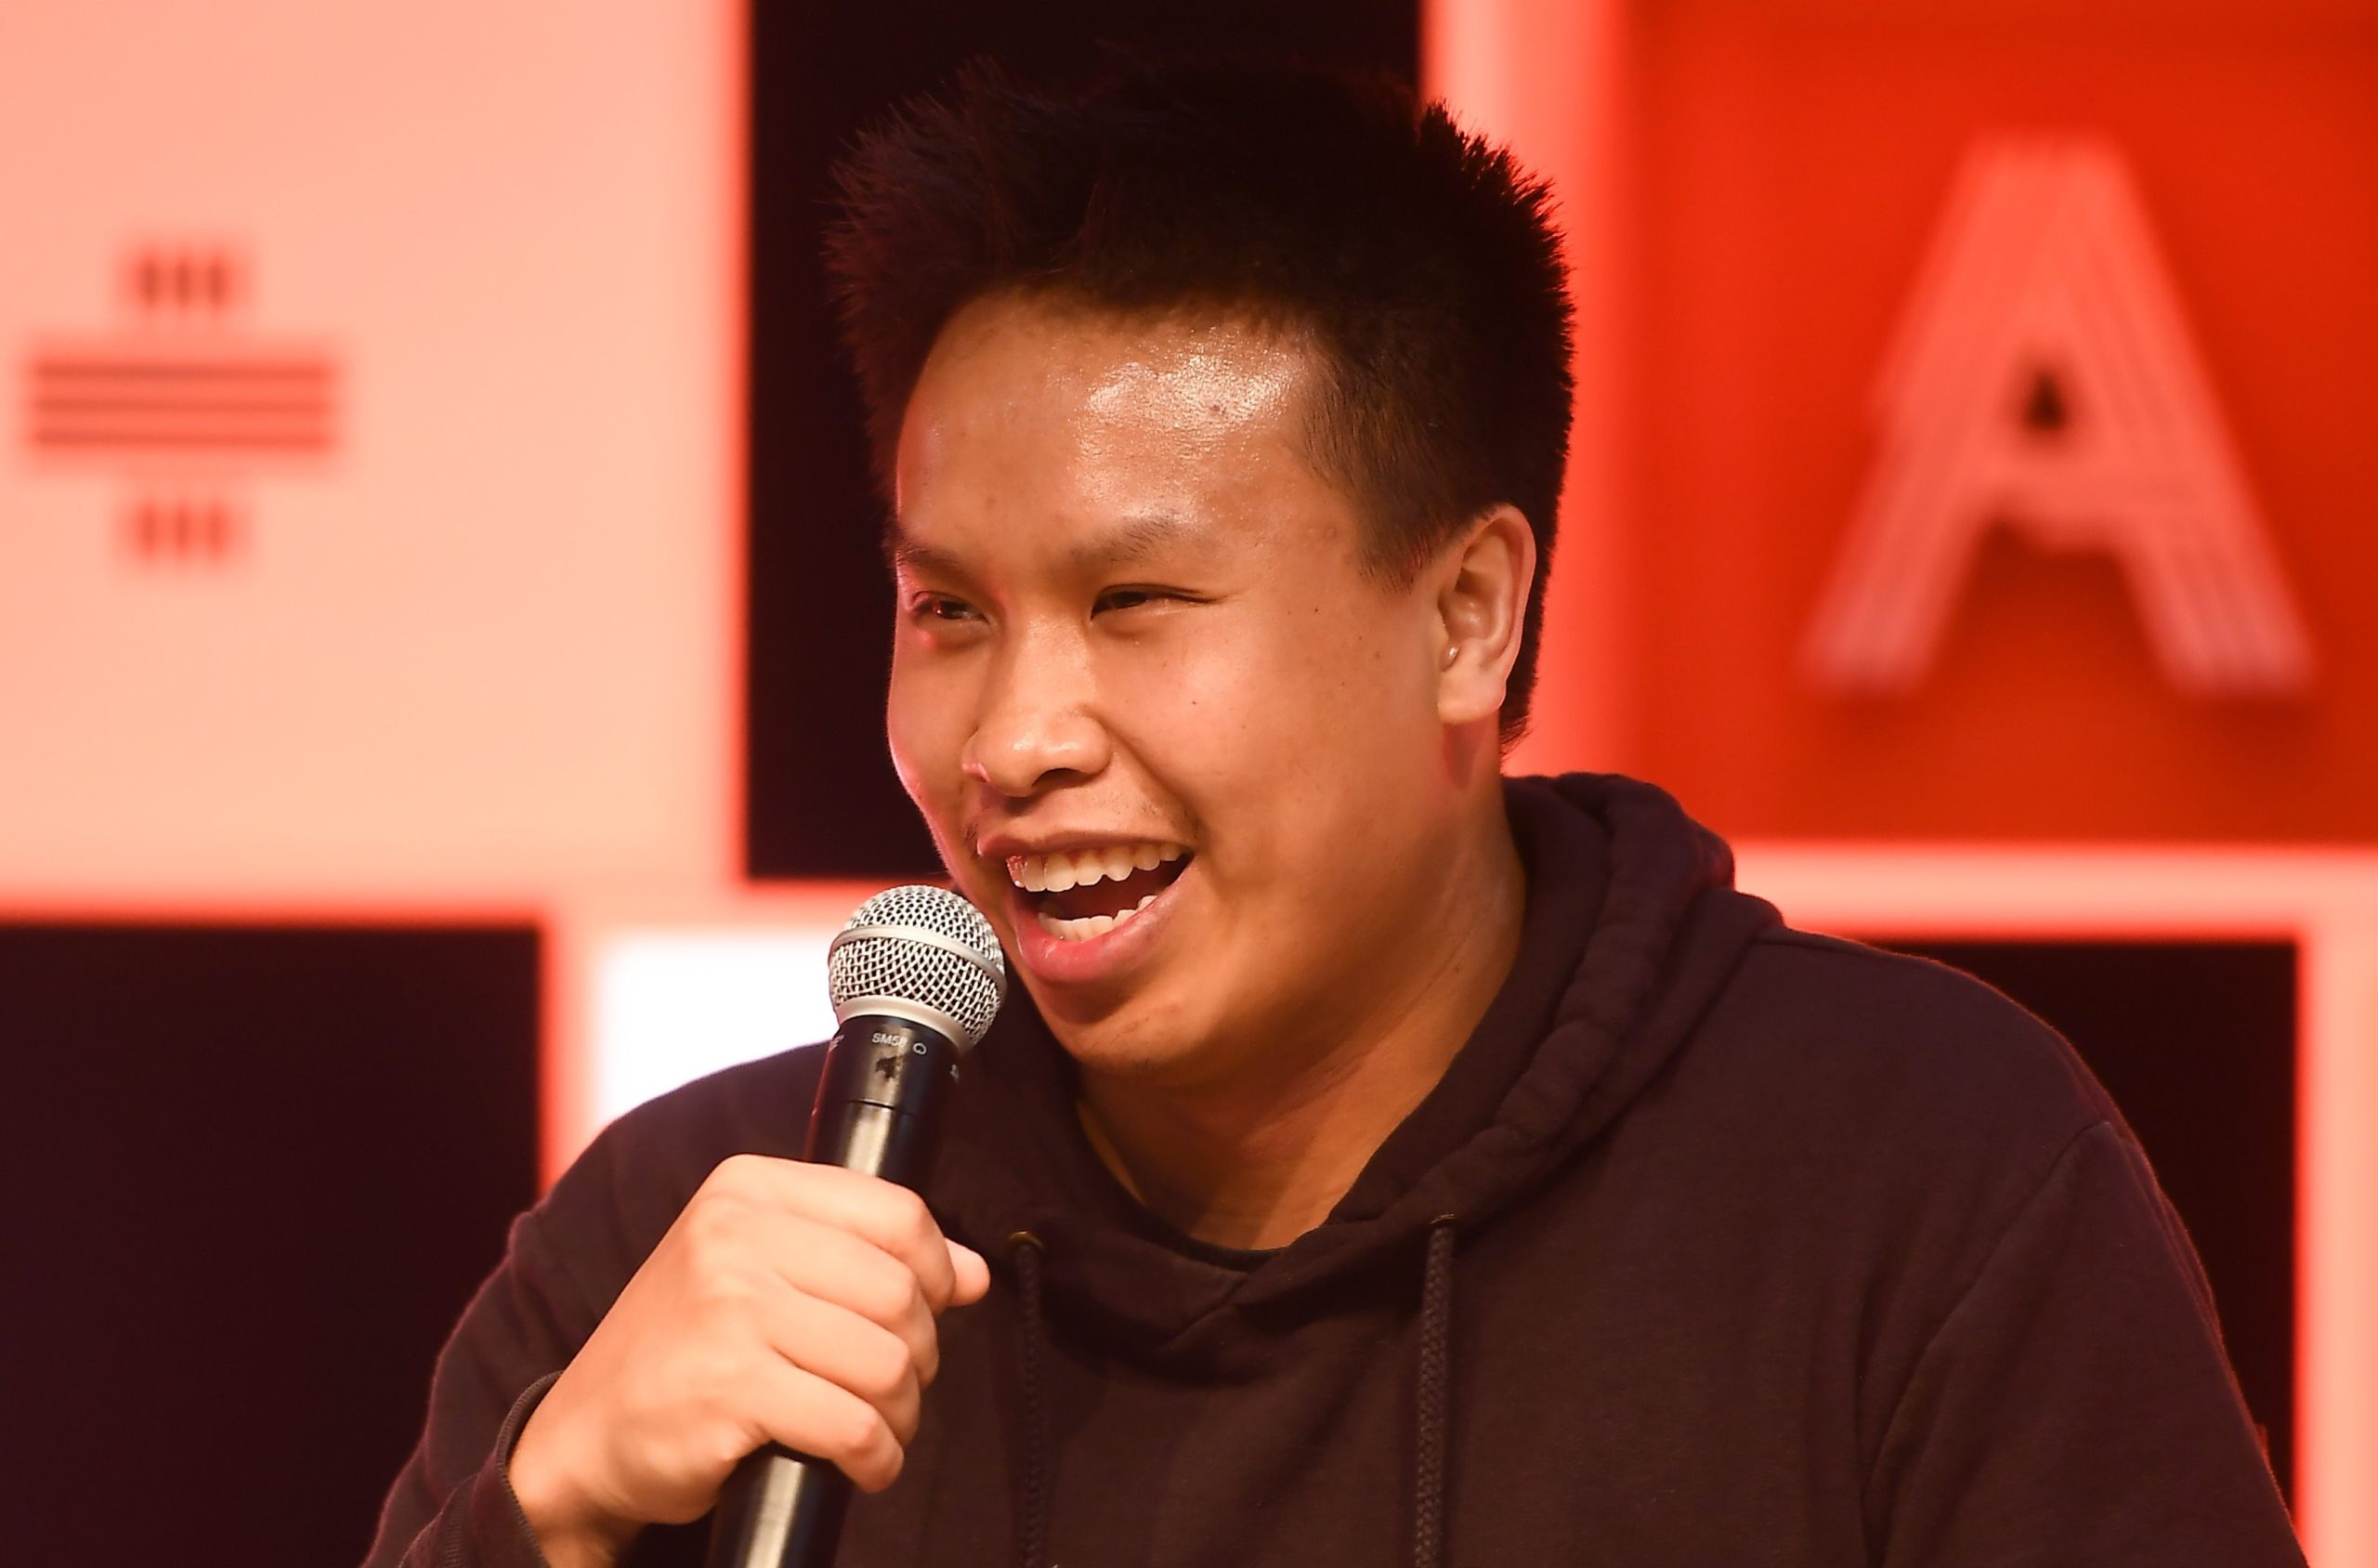 10 July 2019; Andy Dinh, Founder, Team SoloMid, on Q + A Stage during day two of RISE 2019 at the Hong Kong Convention and Exhibition Centre in Hong Kong. Photo by David Fitzgerald/RISE via Sportsfile